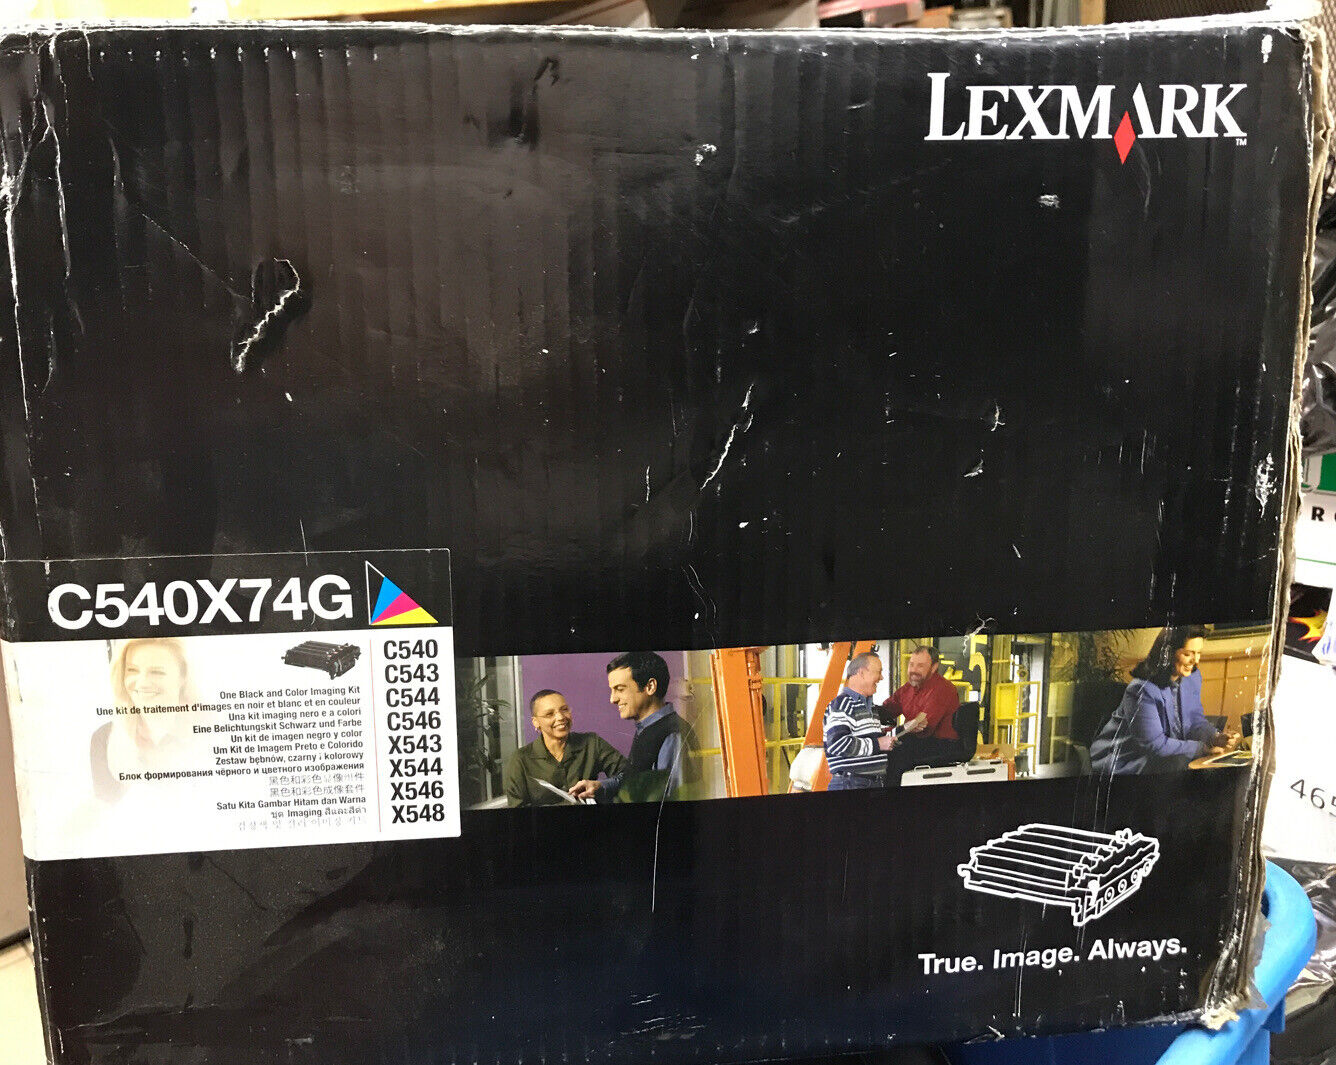 ✅ LEXMARK C540X74G Black‼️/ Color Imaging Kit- Very Distressed Box, Sealed Bags‼